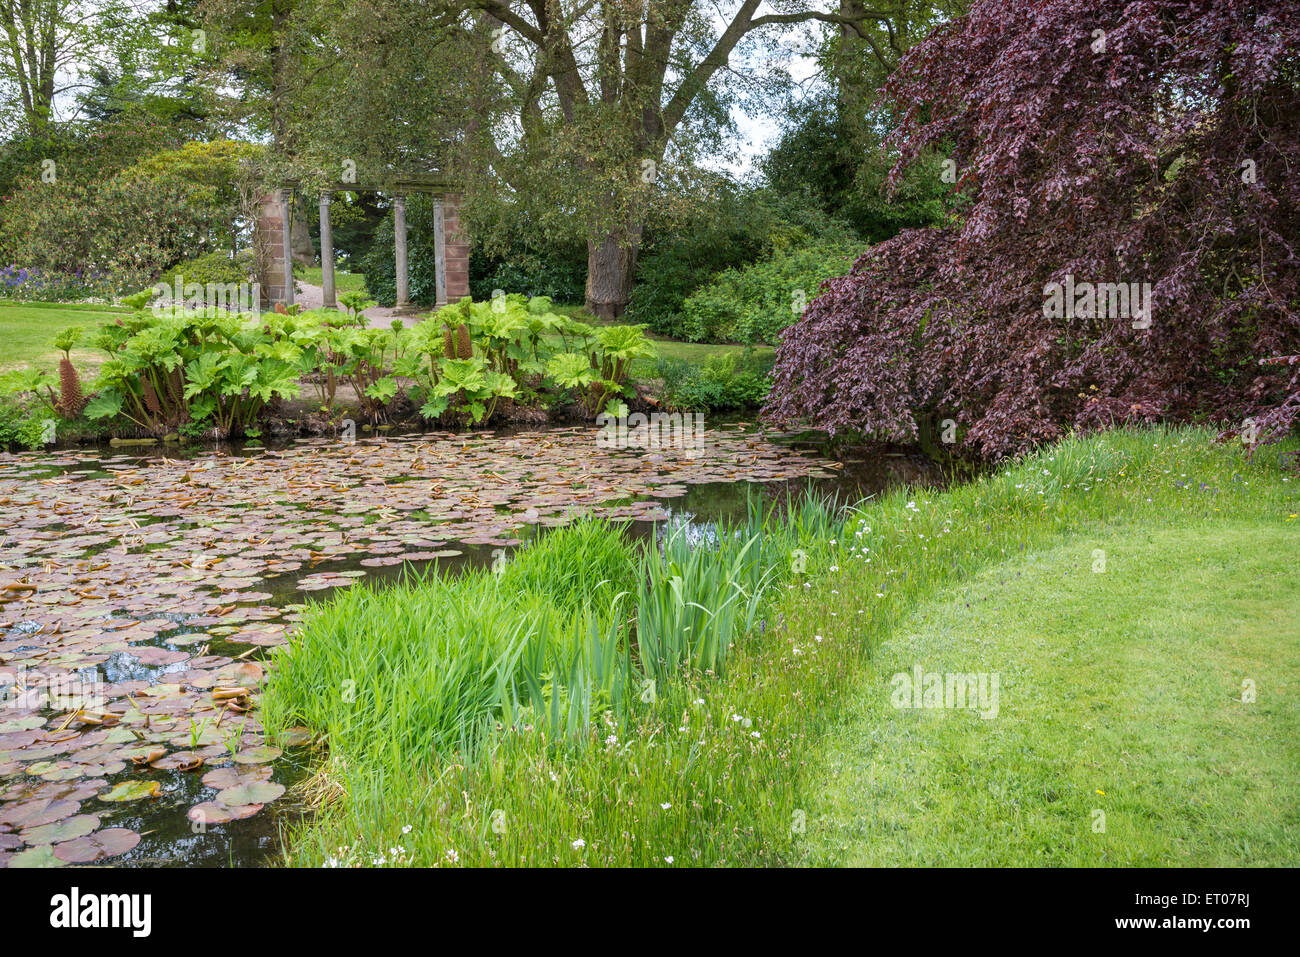 Waterlilies in the lake at Cholmondeley Castle gardens. Wildflowers in the rough grass at the waterside. Stock Photo